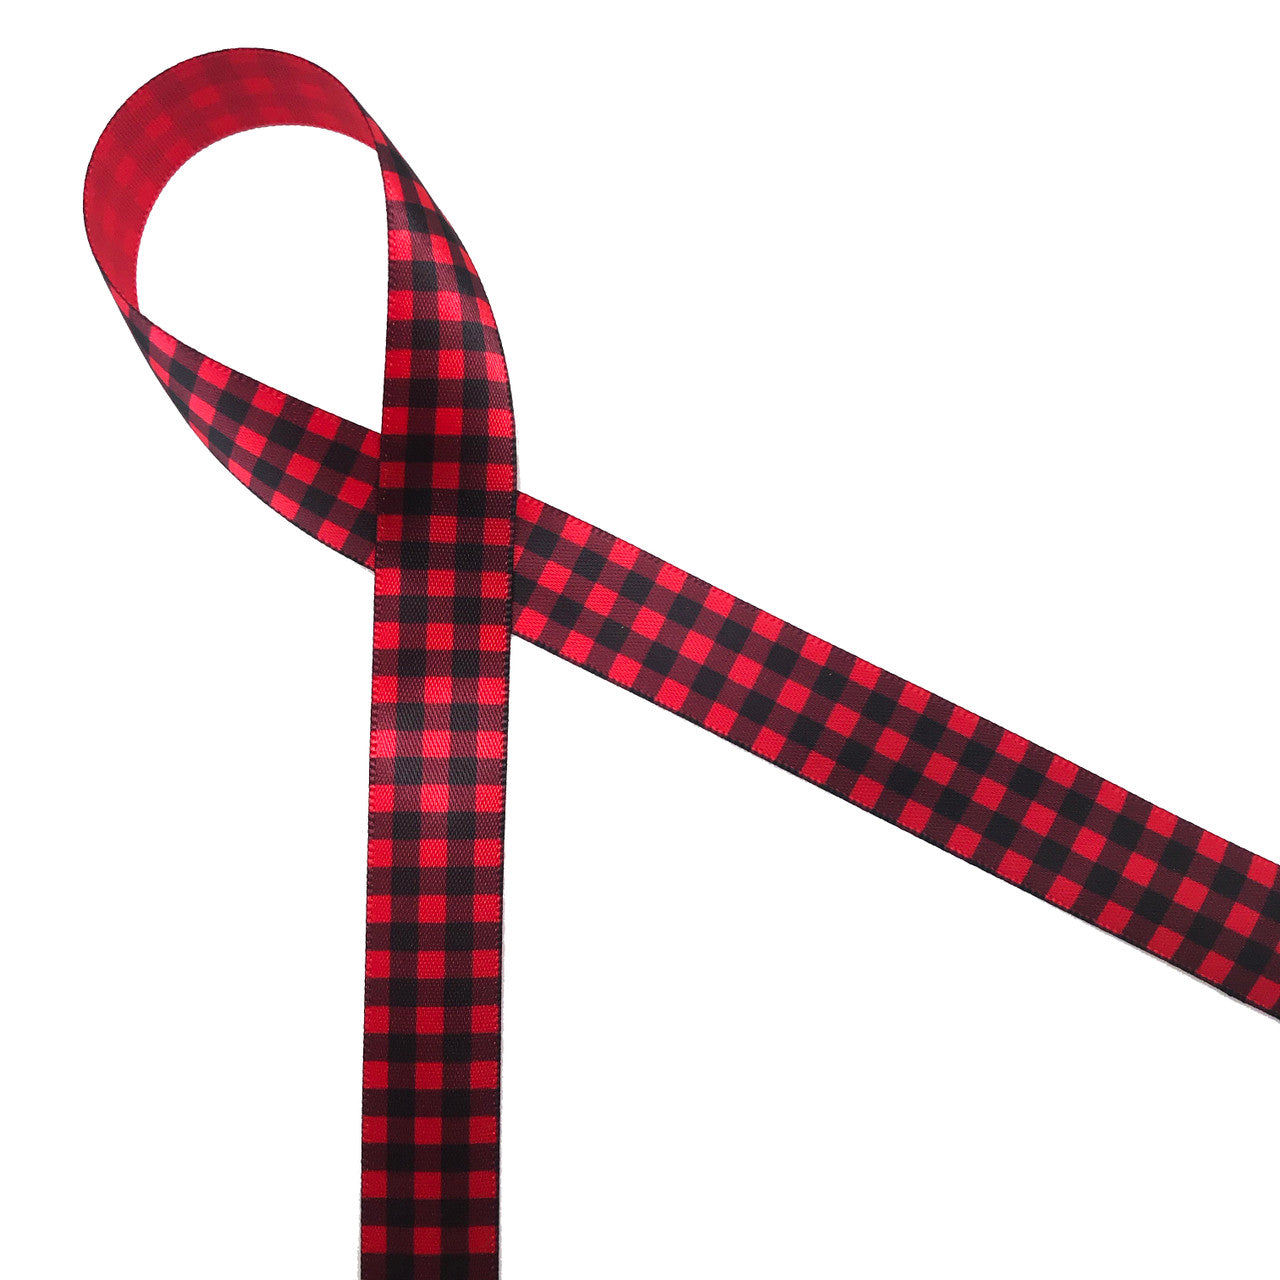 Red and black buffalo plaid is printed on 5/8" red  single face satin ribbon. This traditional plaid makes a country Christmas theme complete.